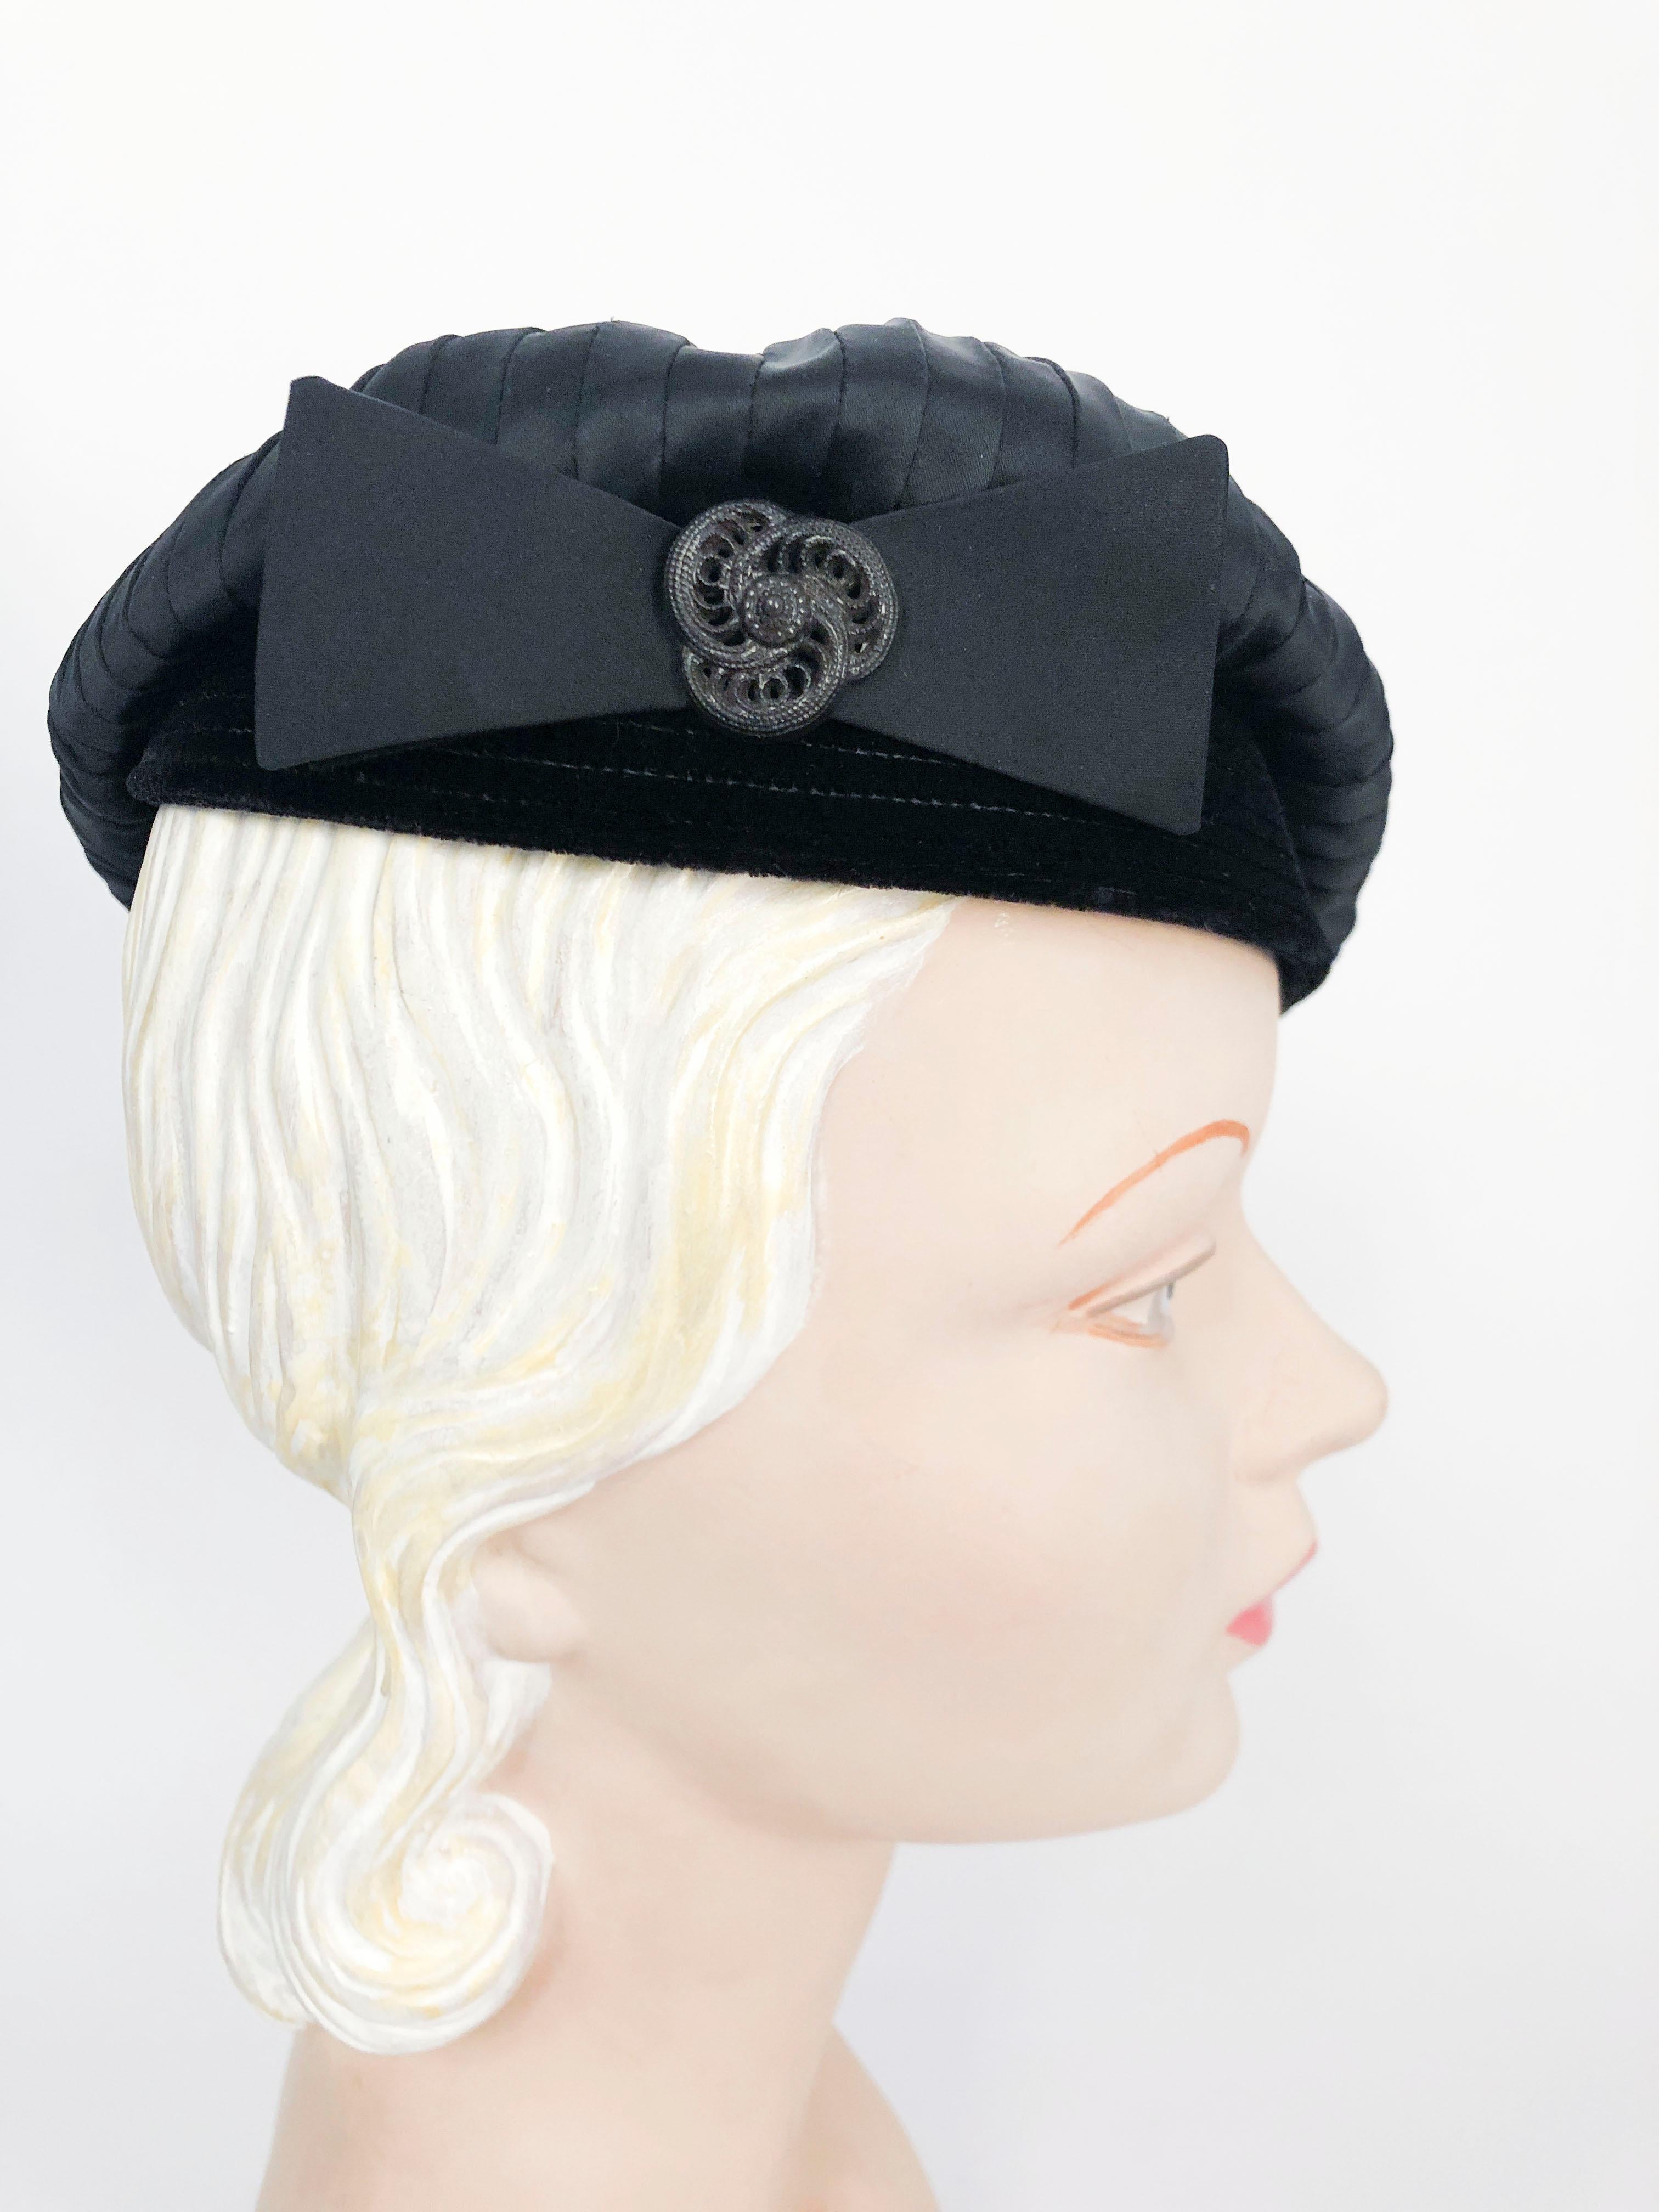 Women's 1950s Bonwit Teller Black Cap/Tam with Gathered Accents and Bow